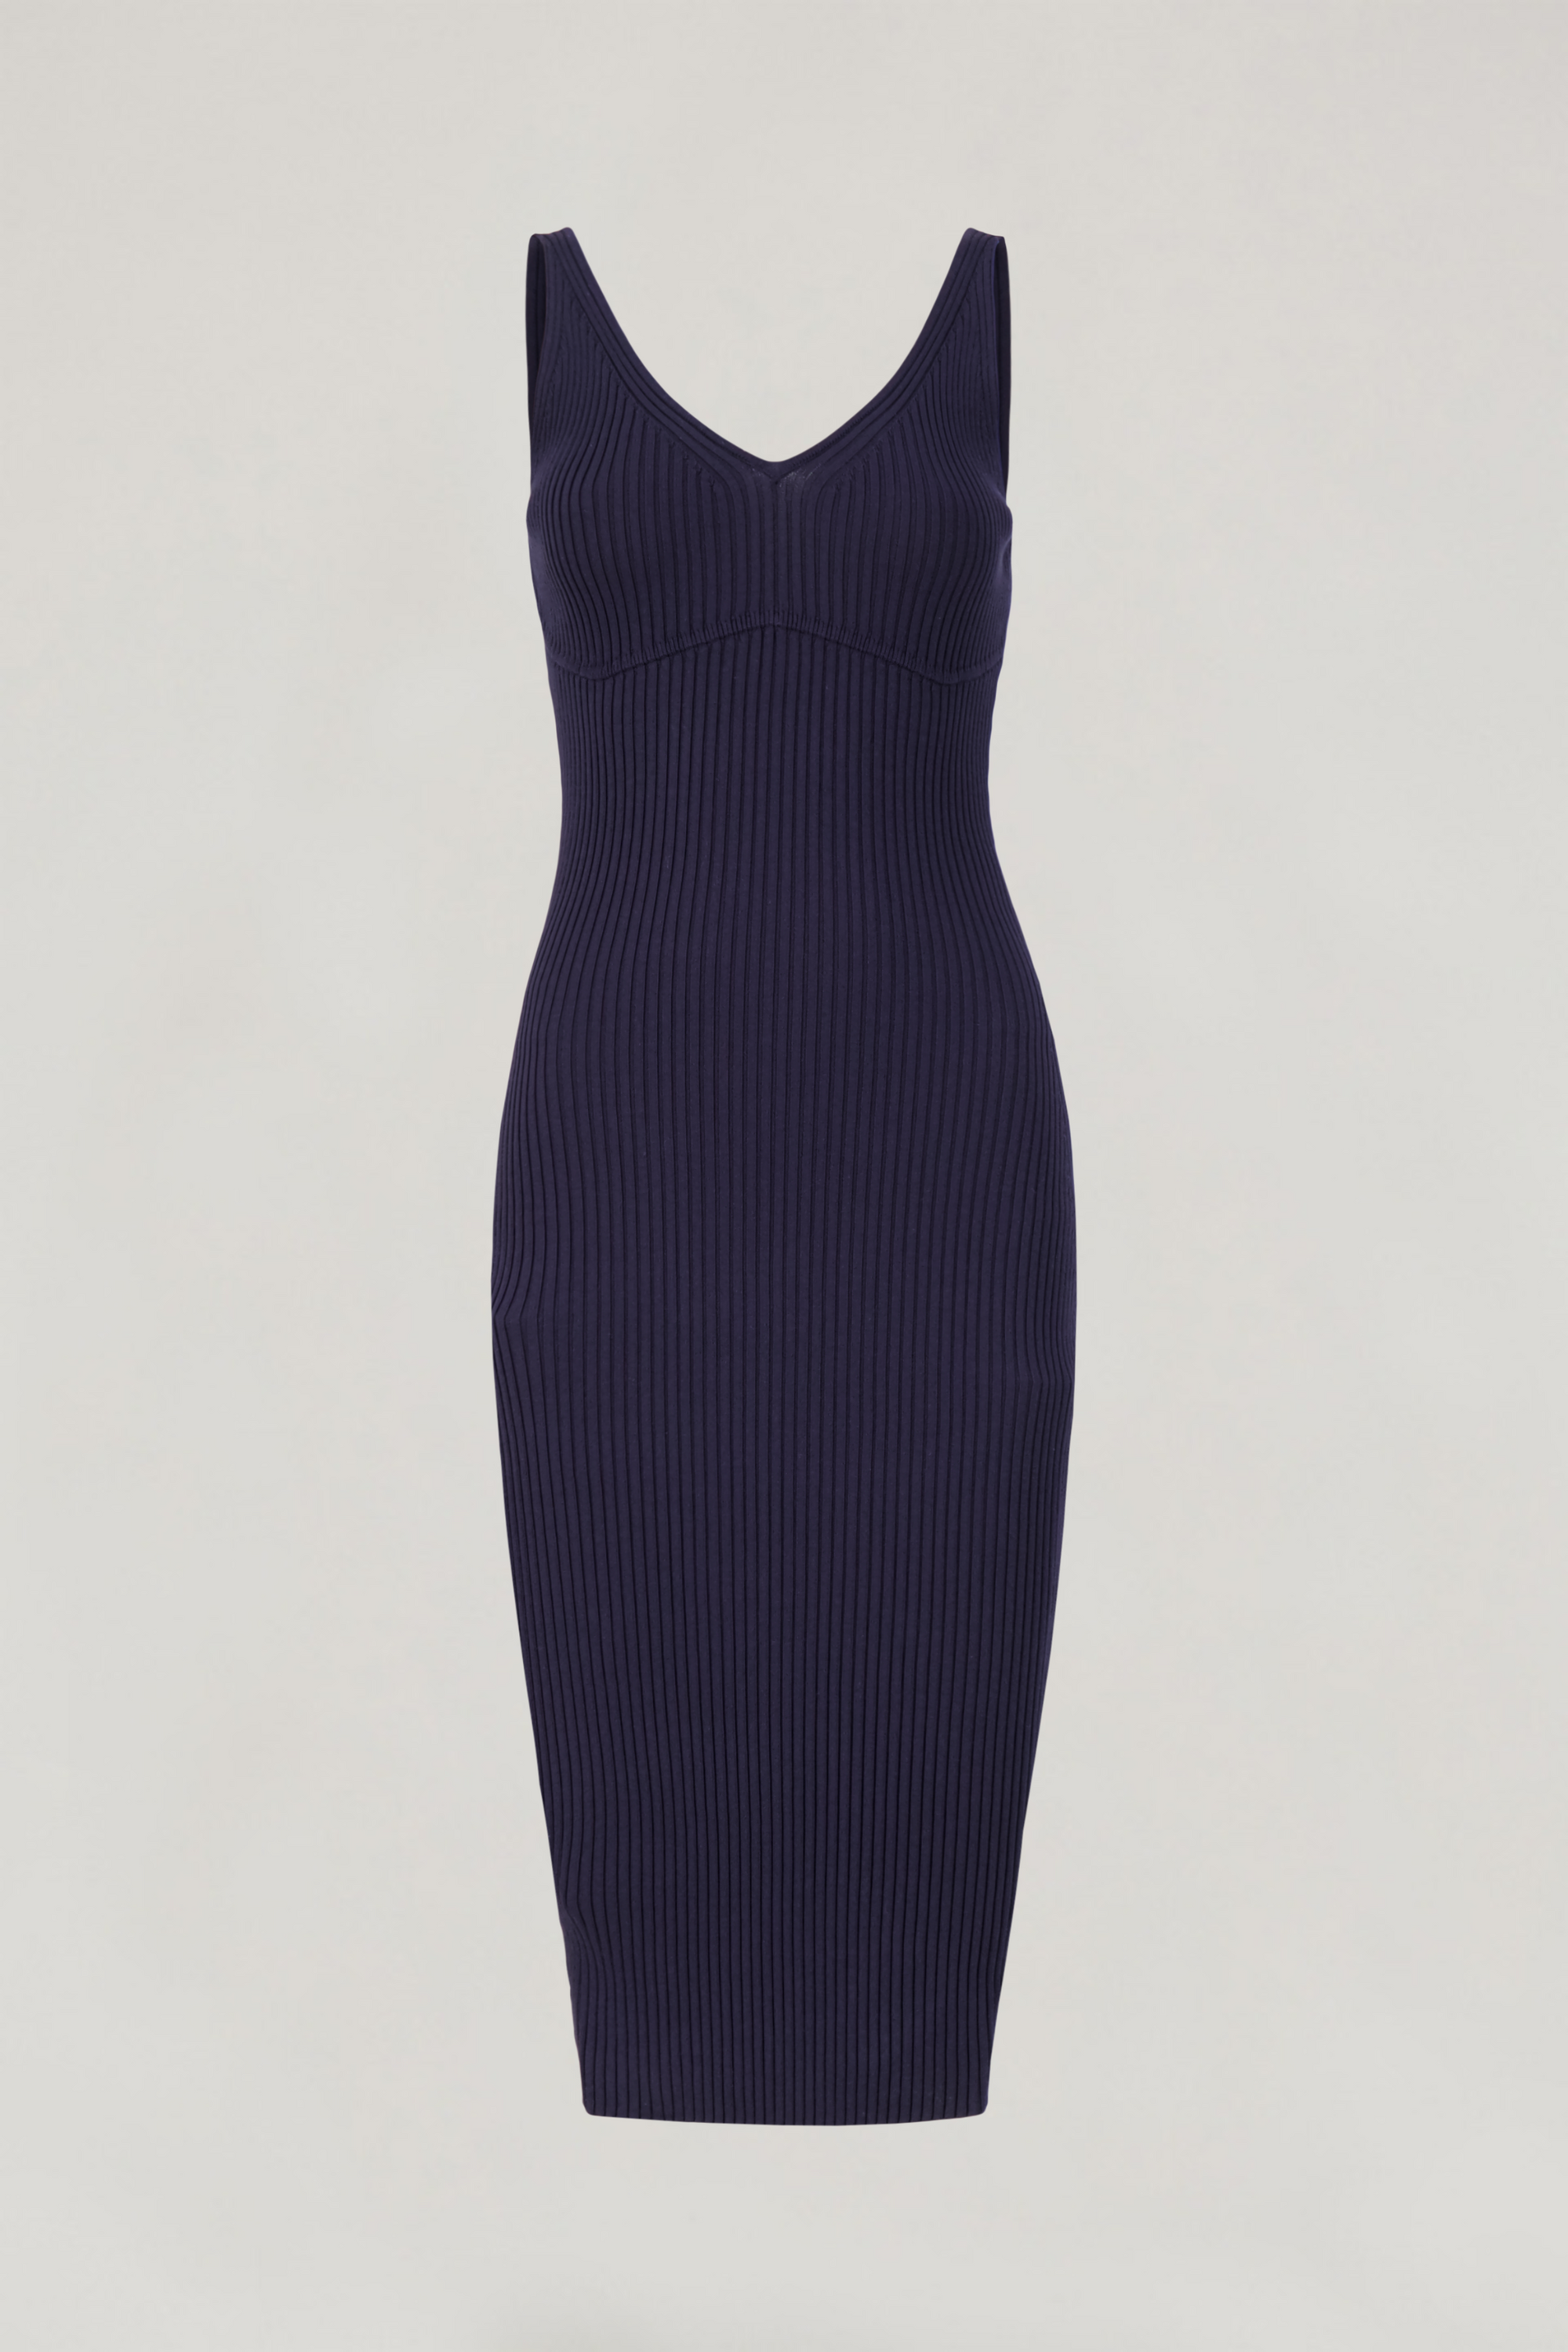 THE ARCHIVED KNIT MIDI